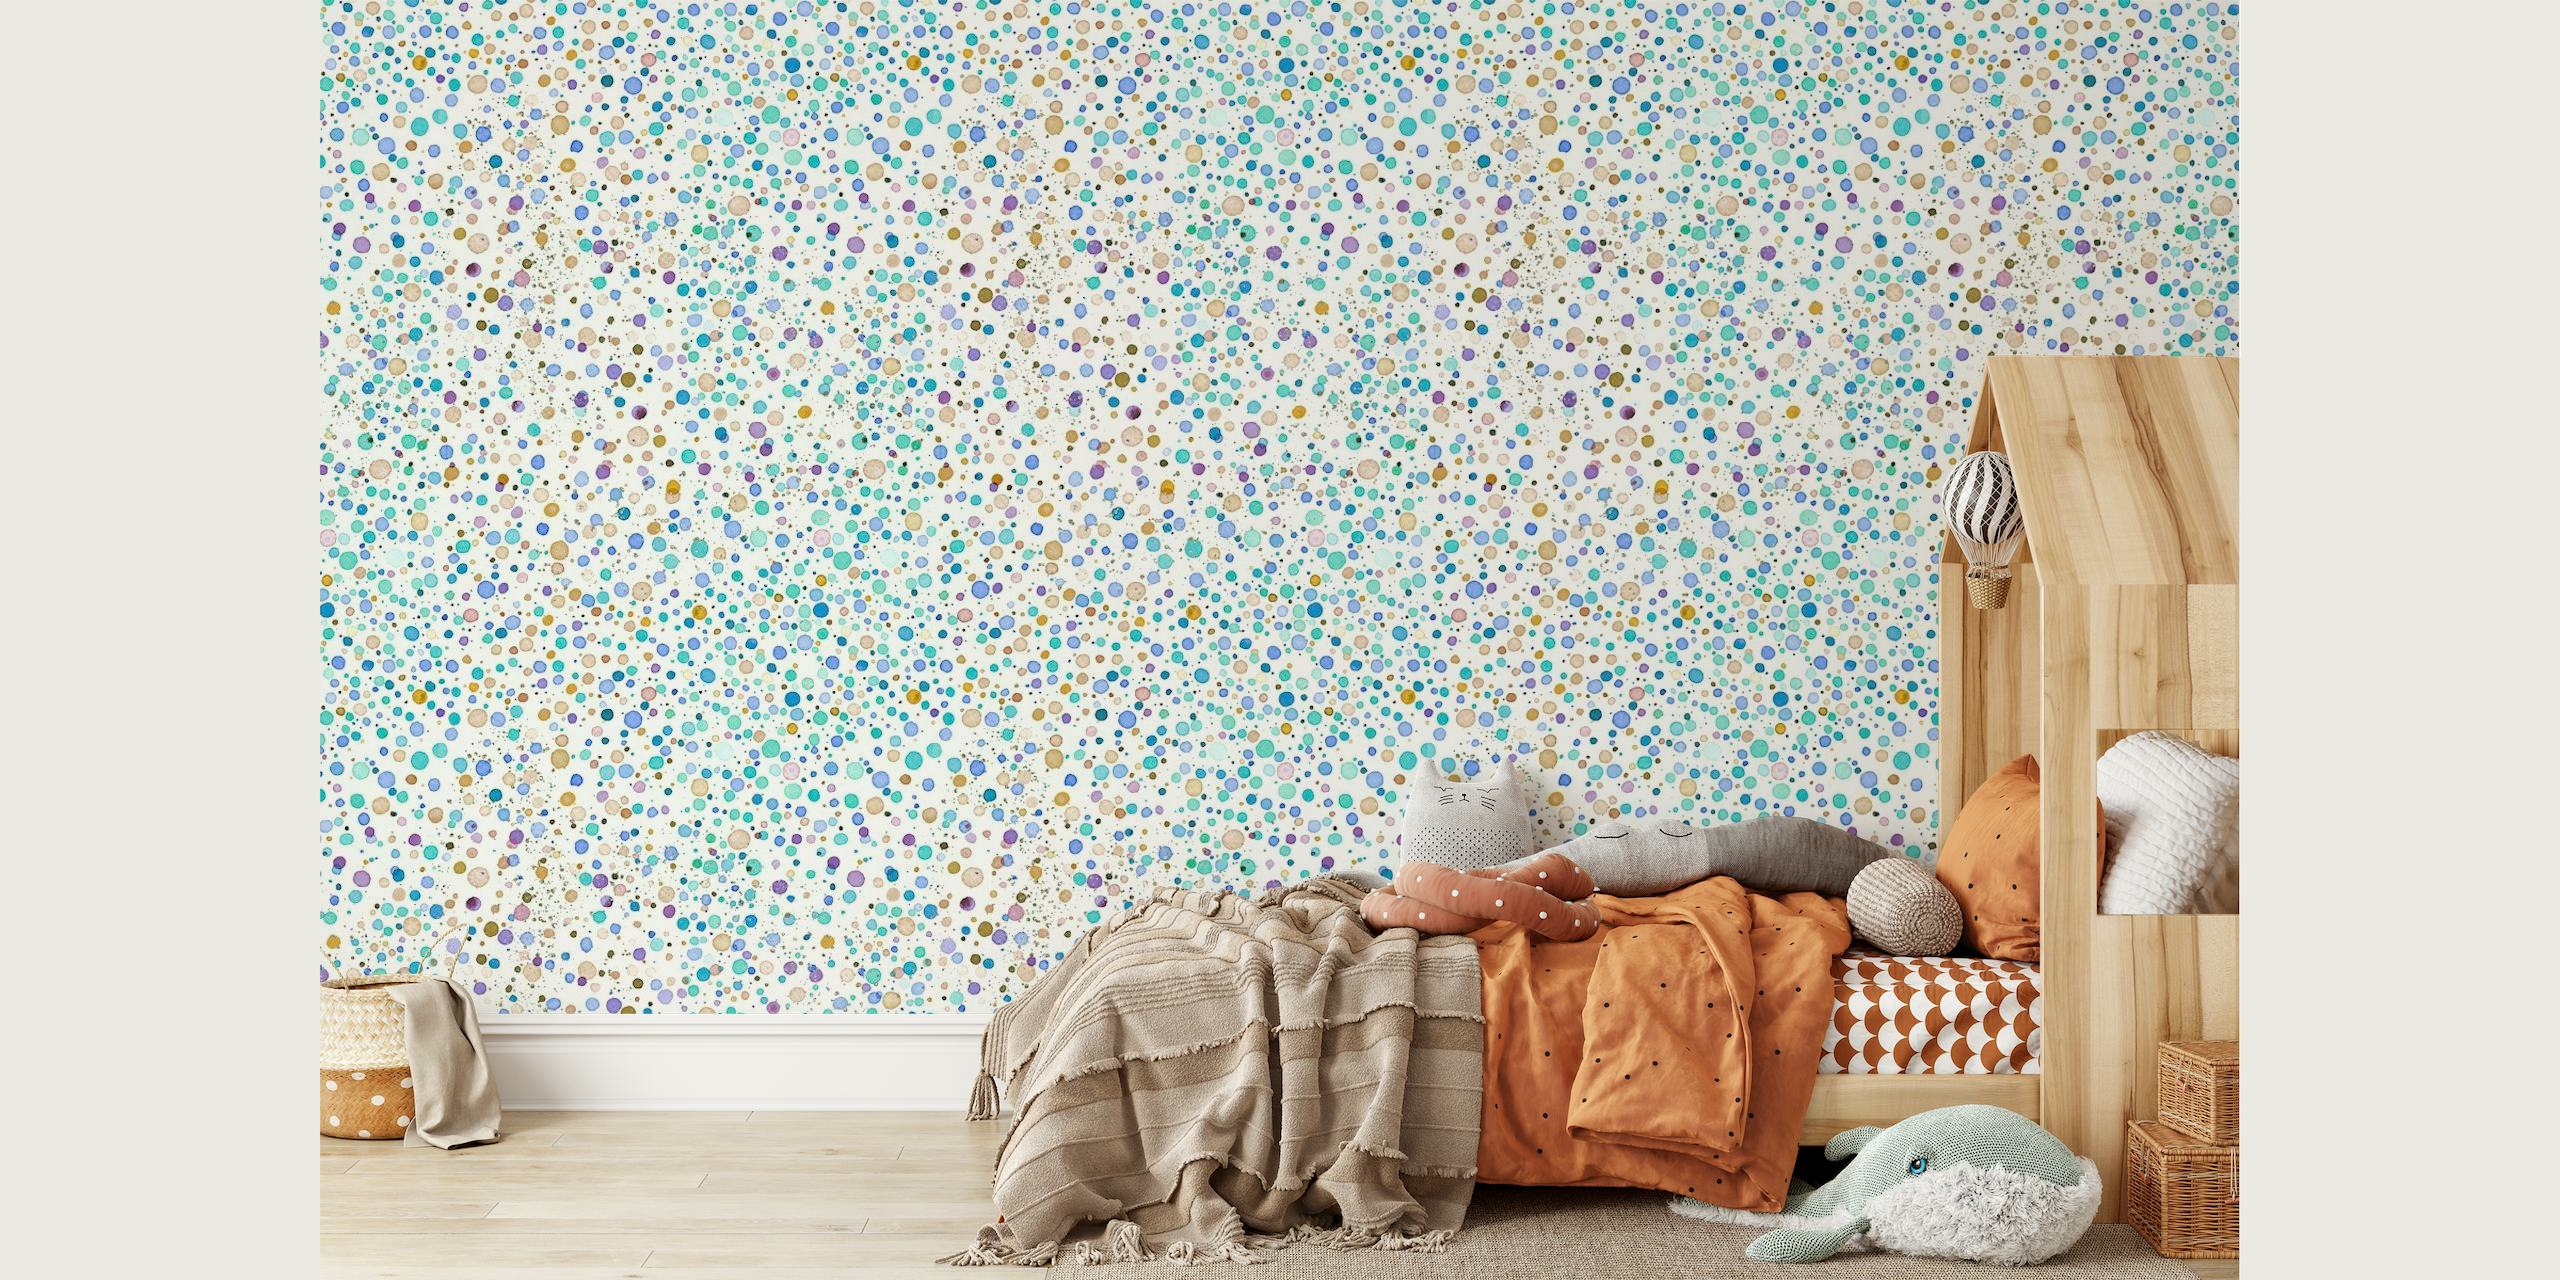 Confetti Cosmic Dots Blue Gold wall mural with a pattern of gold and blue dots on a subtle background